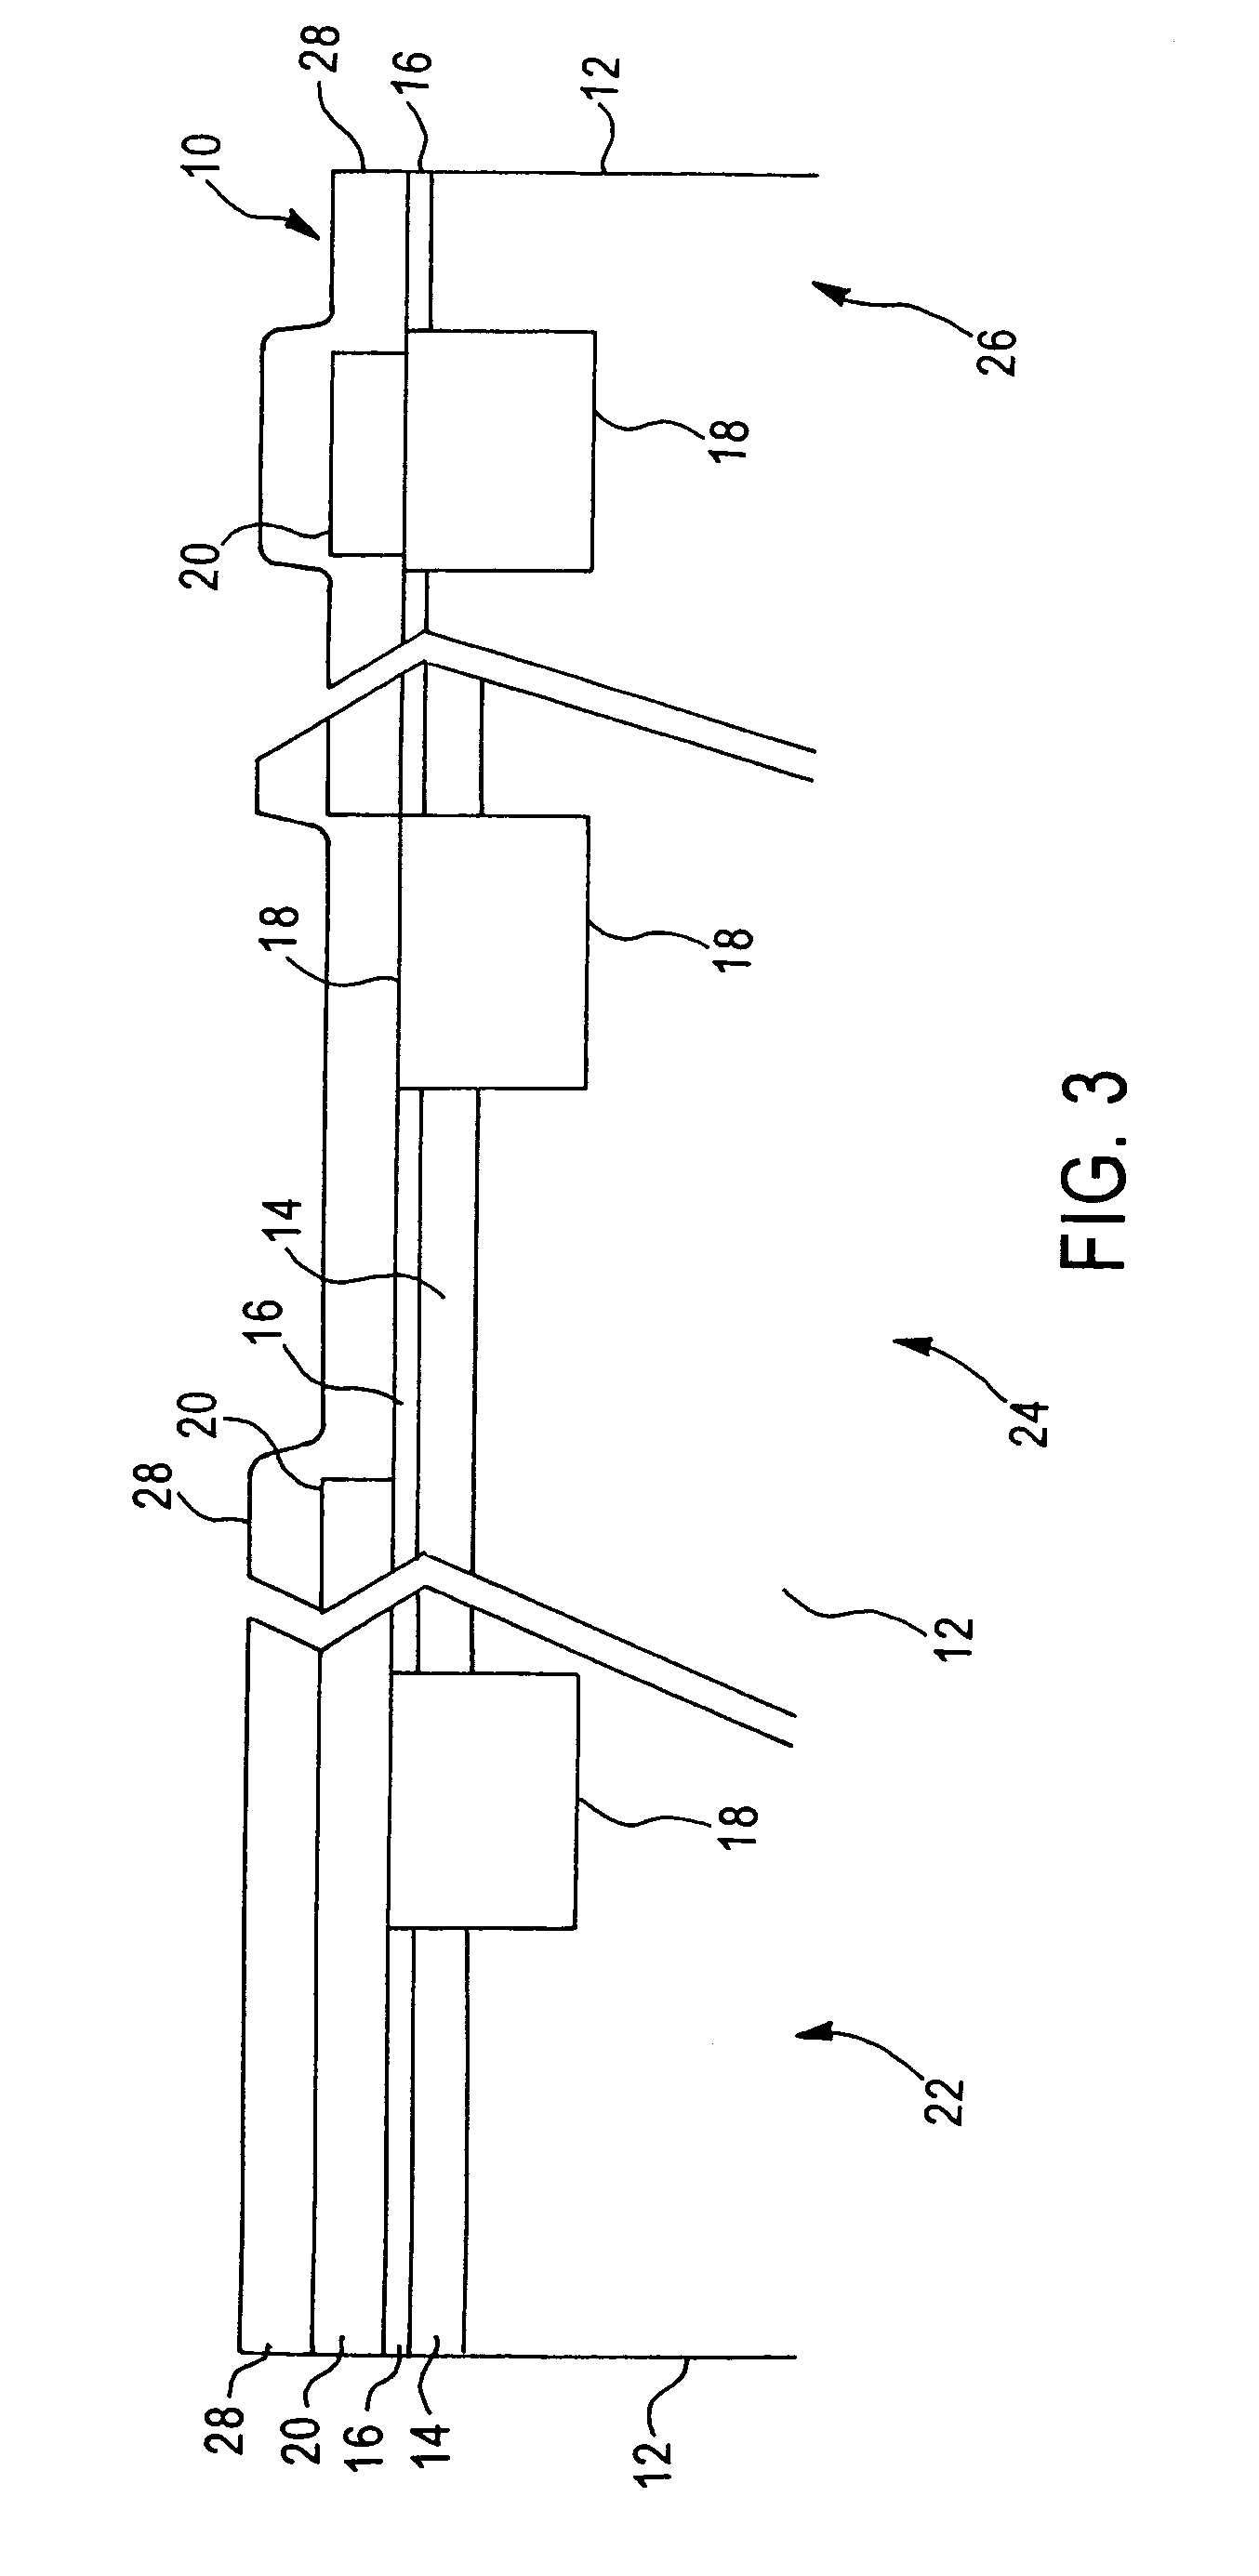 Array of gate dielectric structures to measure gate dielectric thickness and parasitic capacitance